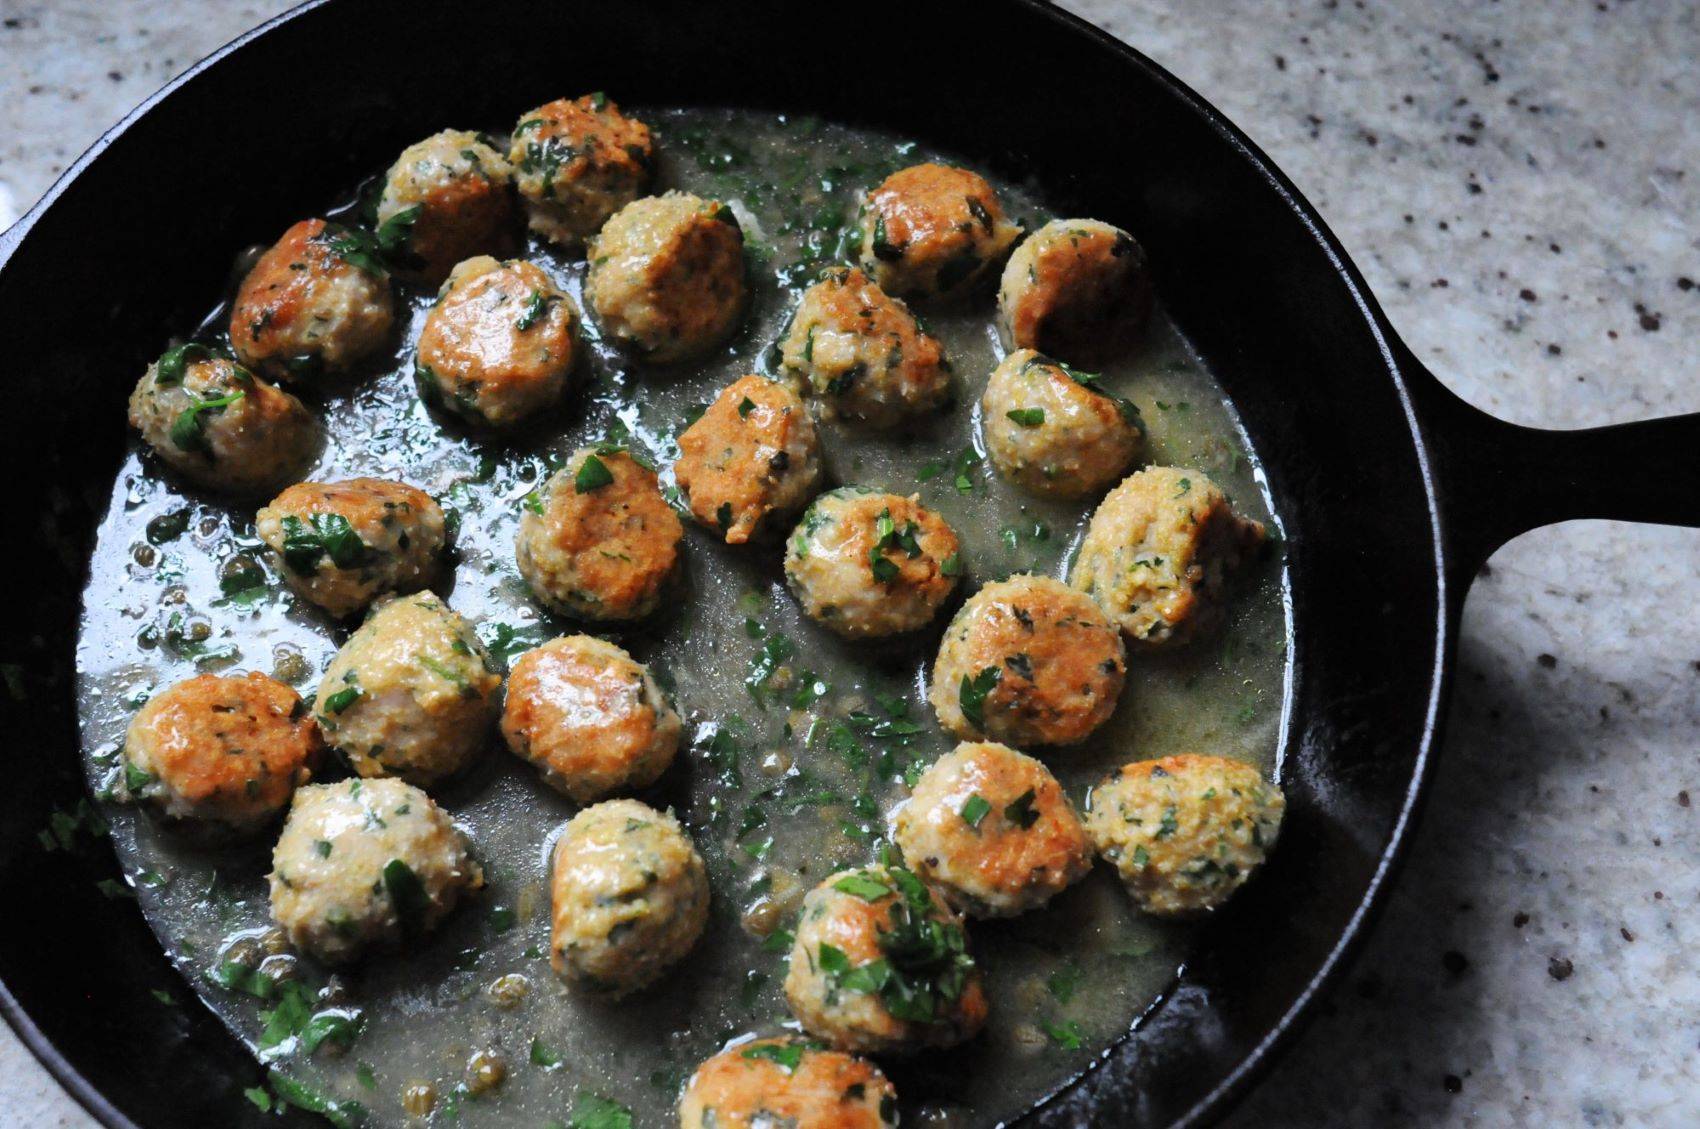 How to Cook Frozen Meatballs on the Stove